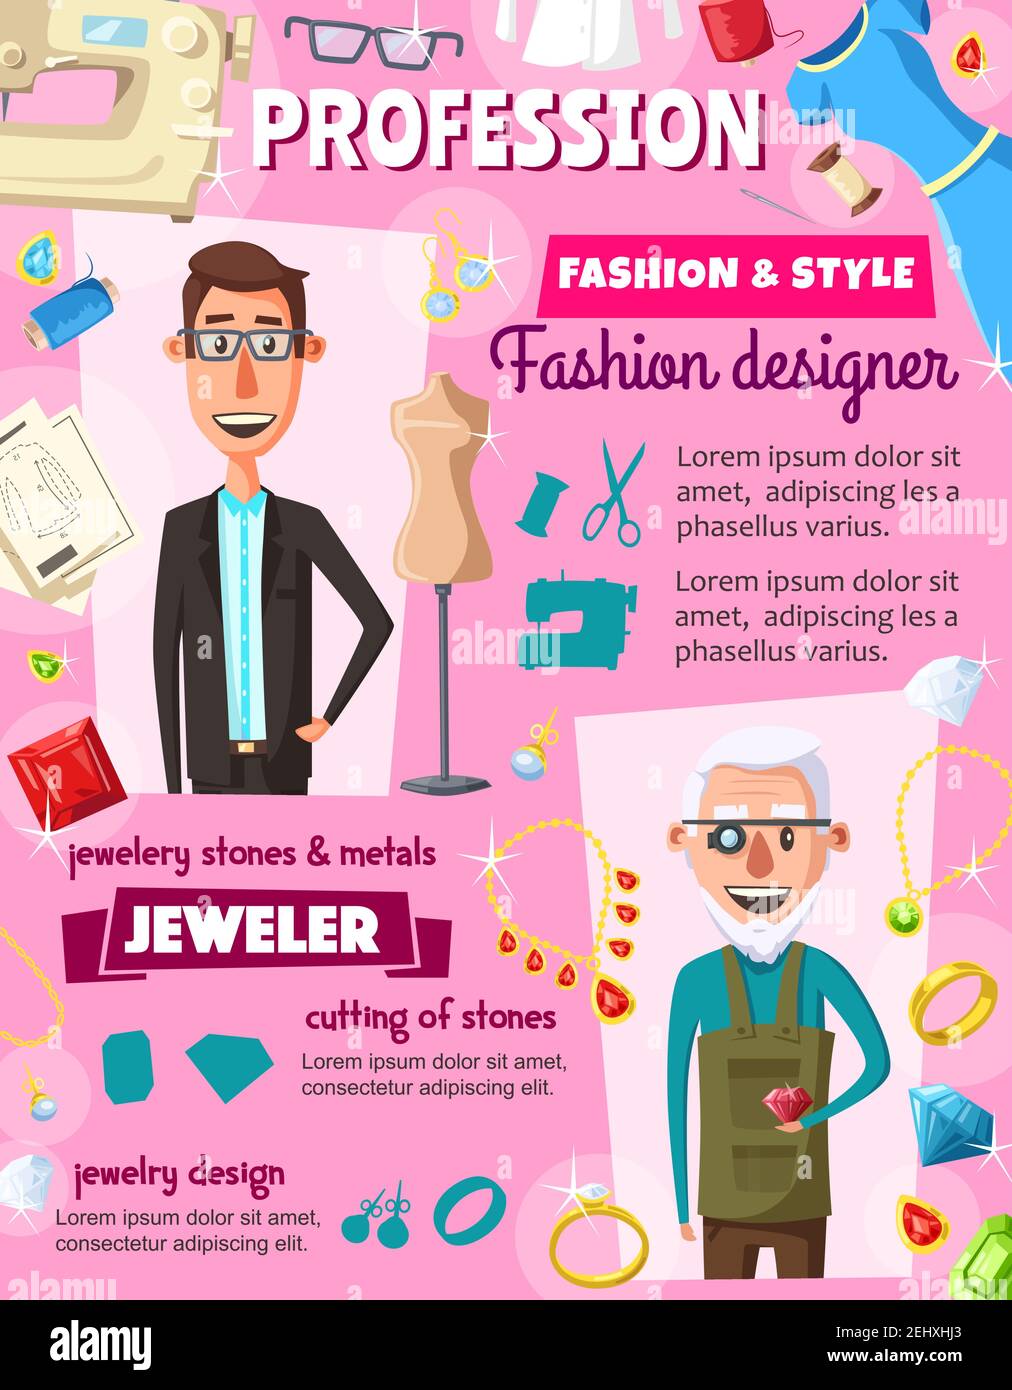 Fashion designer or dressmaker tailor and jeweler professions. Vector dress and clothes tailoring, sewing machine and threads, jewelry diamonds and ge Stock Vector